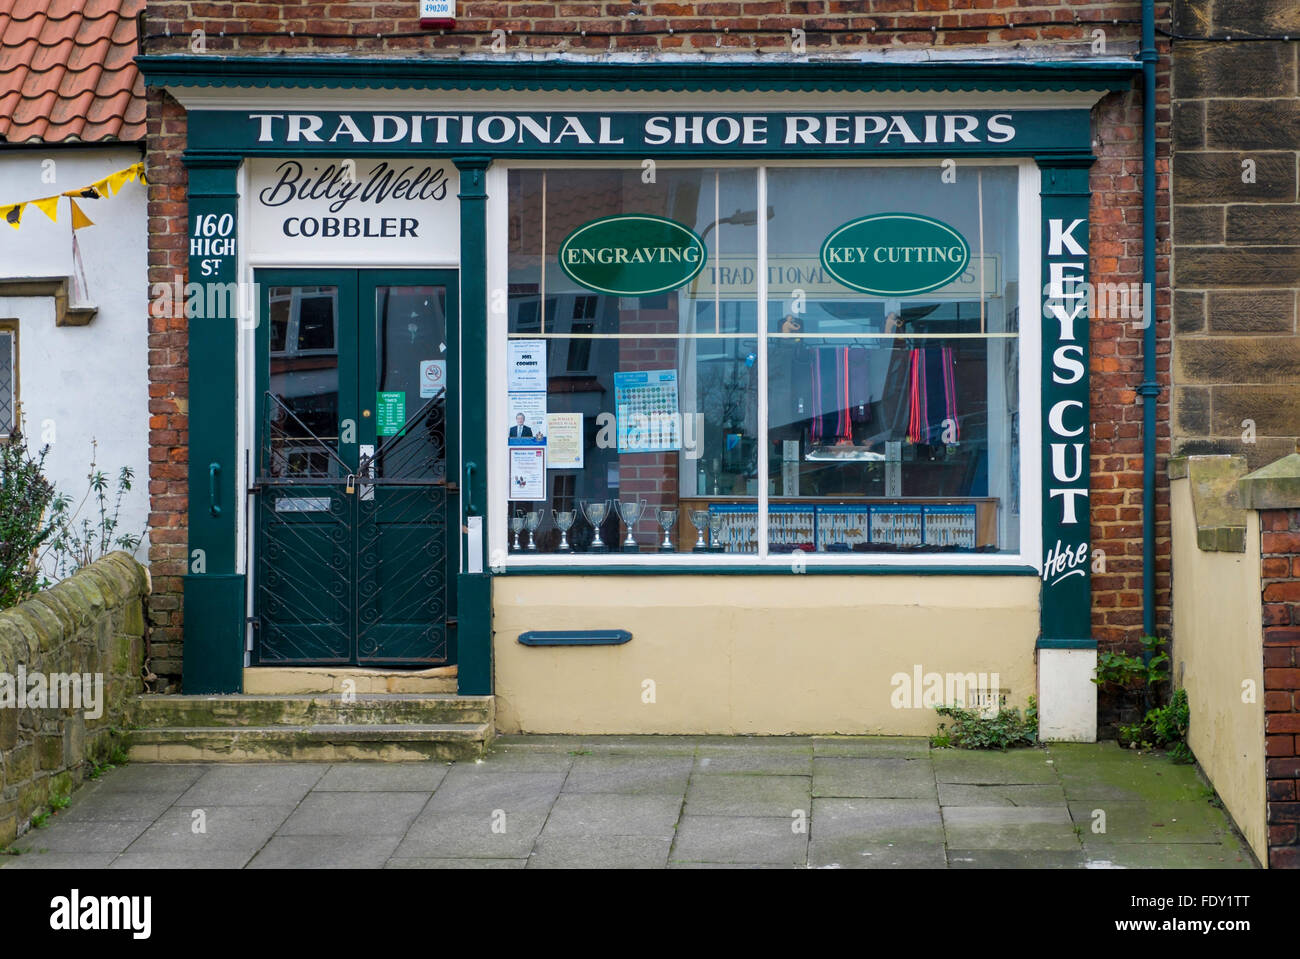 An old fashioned Cobbler's Shoe Repair shop in a village High Street Stock Photo